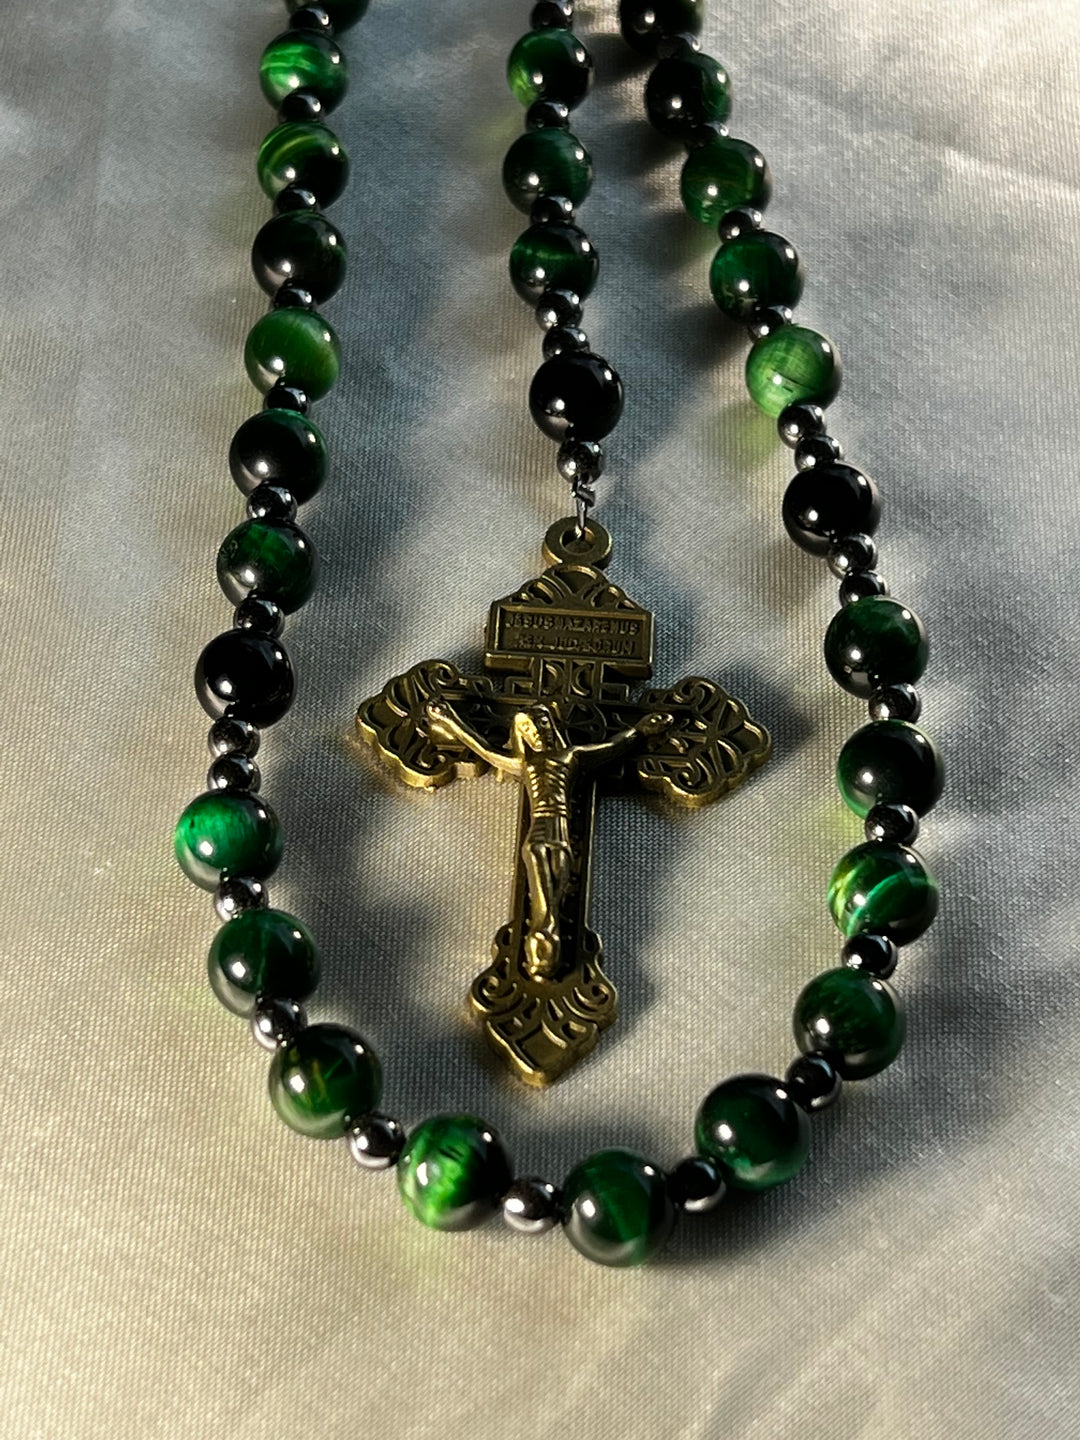 Emerald Green Tiger's Eye beads with Antique Gold St. Michael Crucifix